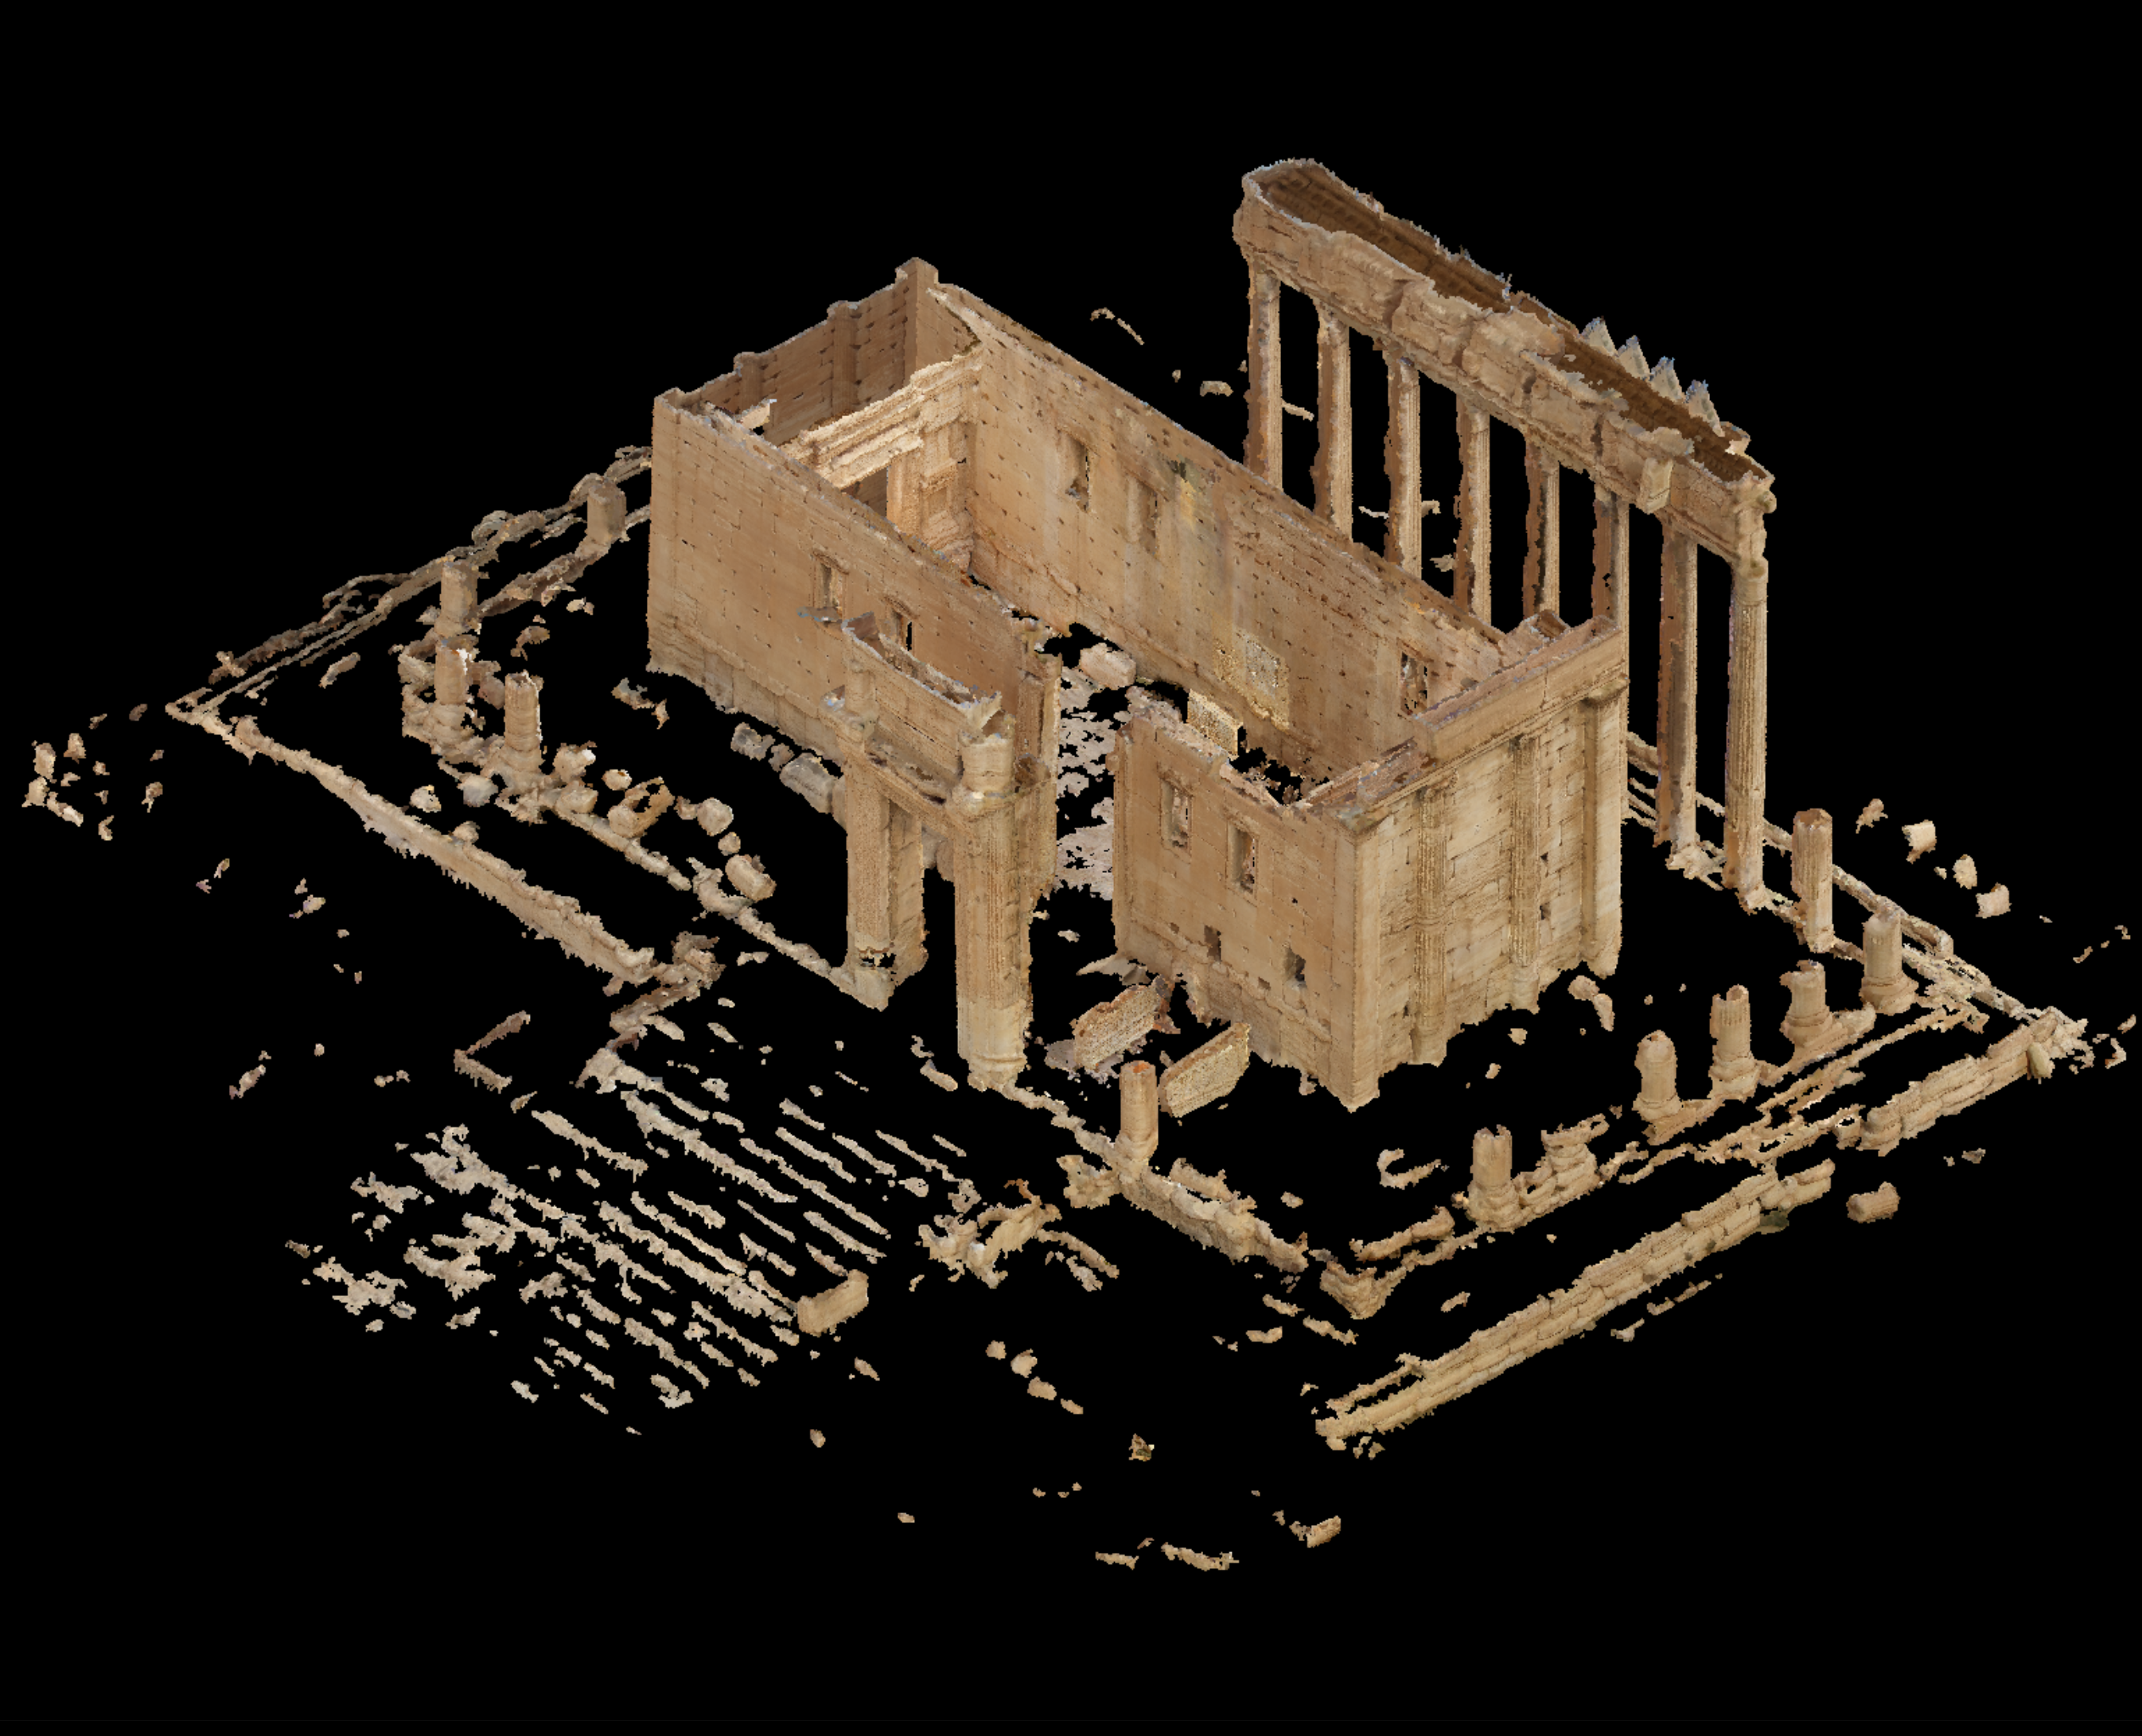 A digital 3D model of the ancient Temple of Bel in Palmyra, Syria.